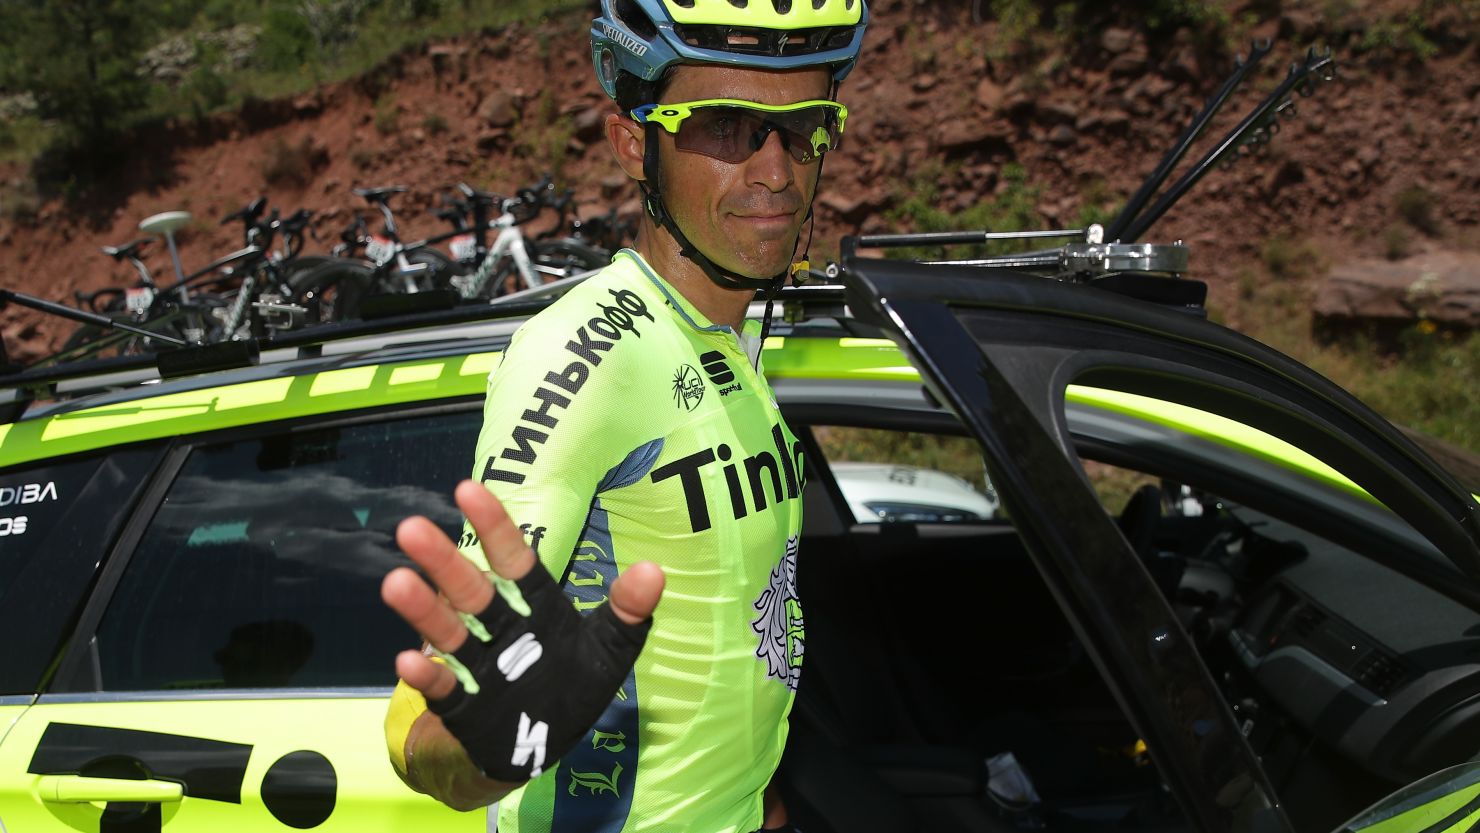 Alberto Contador of Spain climbs into the Tinkoff team car to abandon the Tour de France on the ninth stage. 